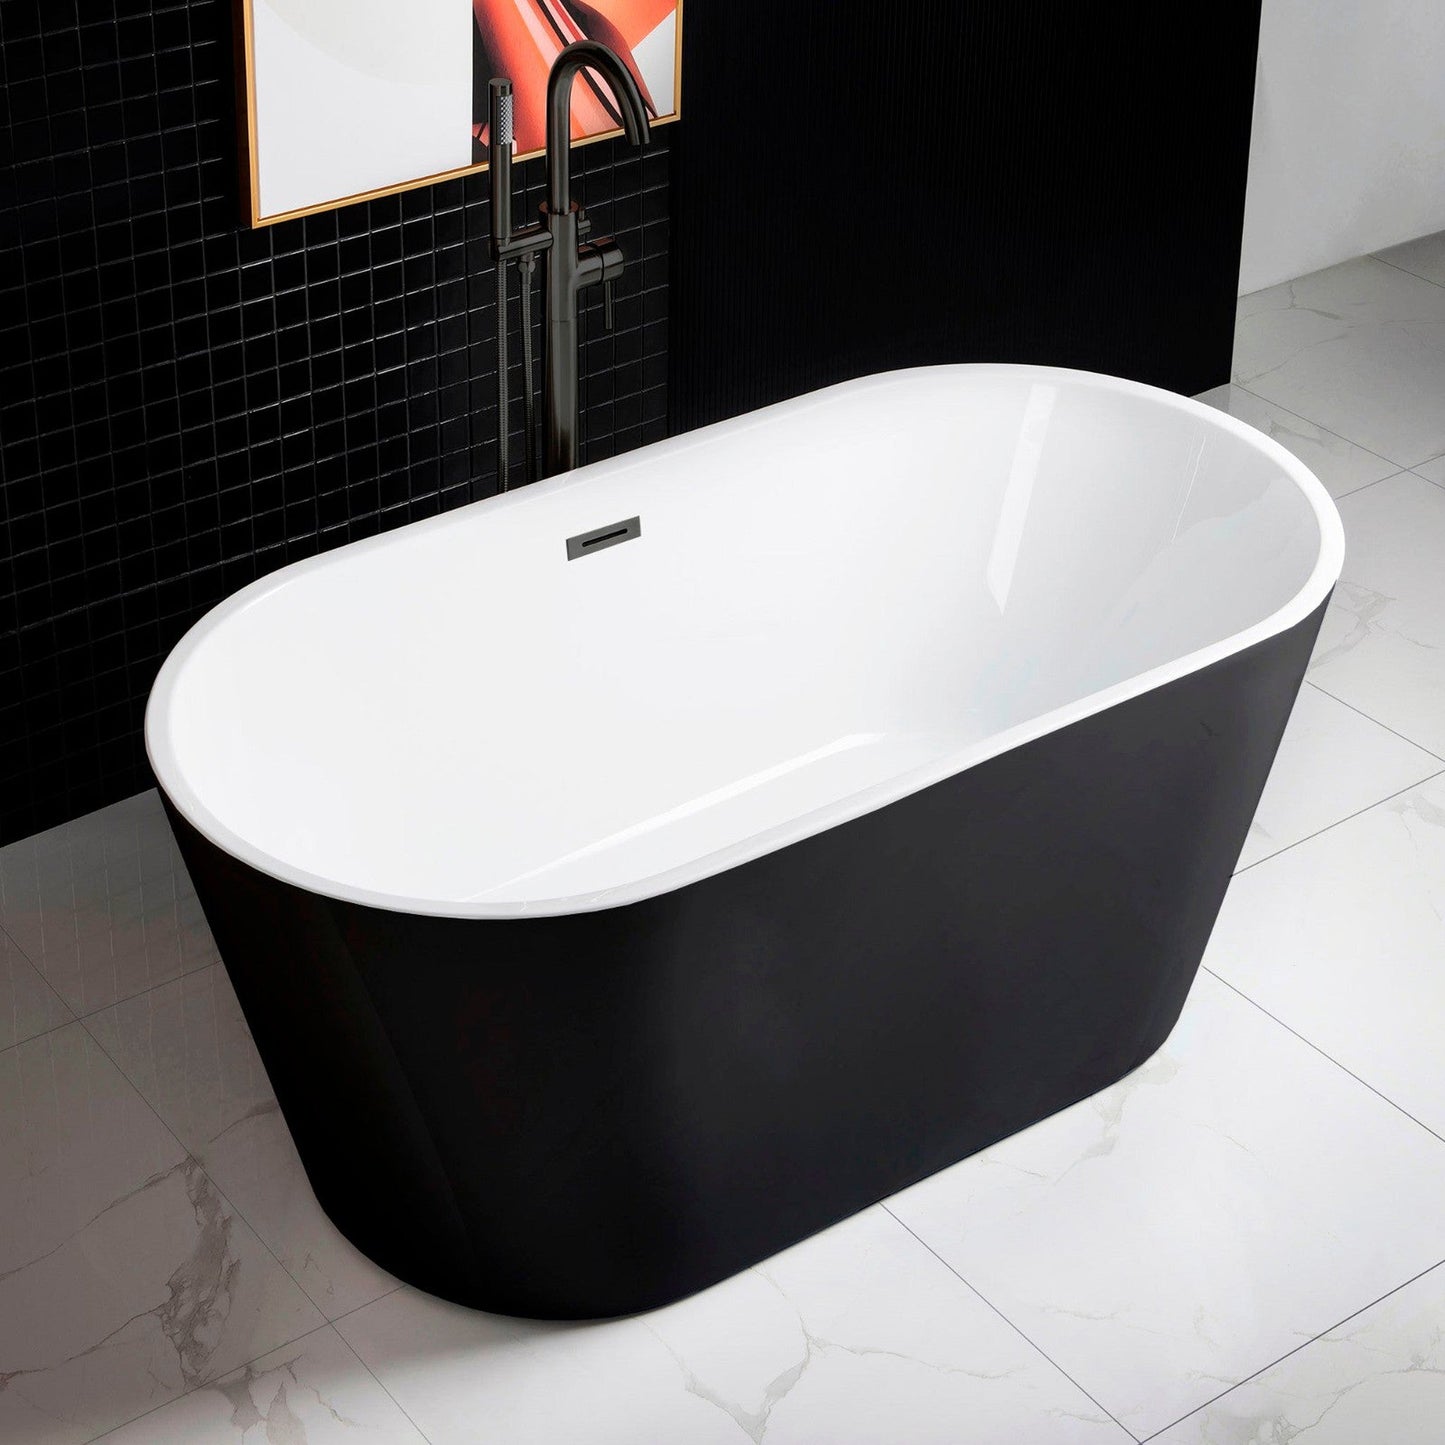 WoodBridge 59" Black Acrylic Freestanding Contemporary Soaking Bathtub With Matte Black Drain, Overflow, F0072MBDR Tub Filler and Caddy Tray